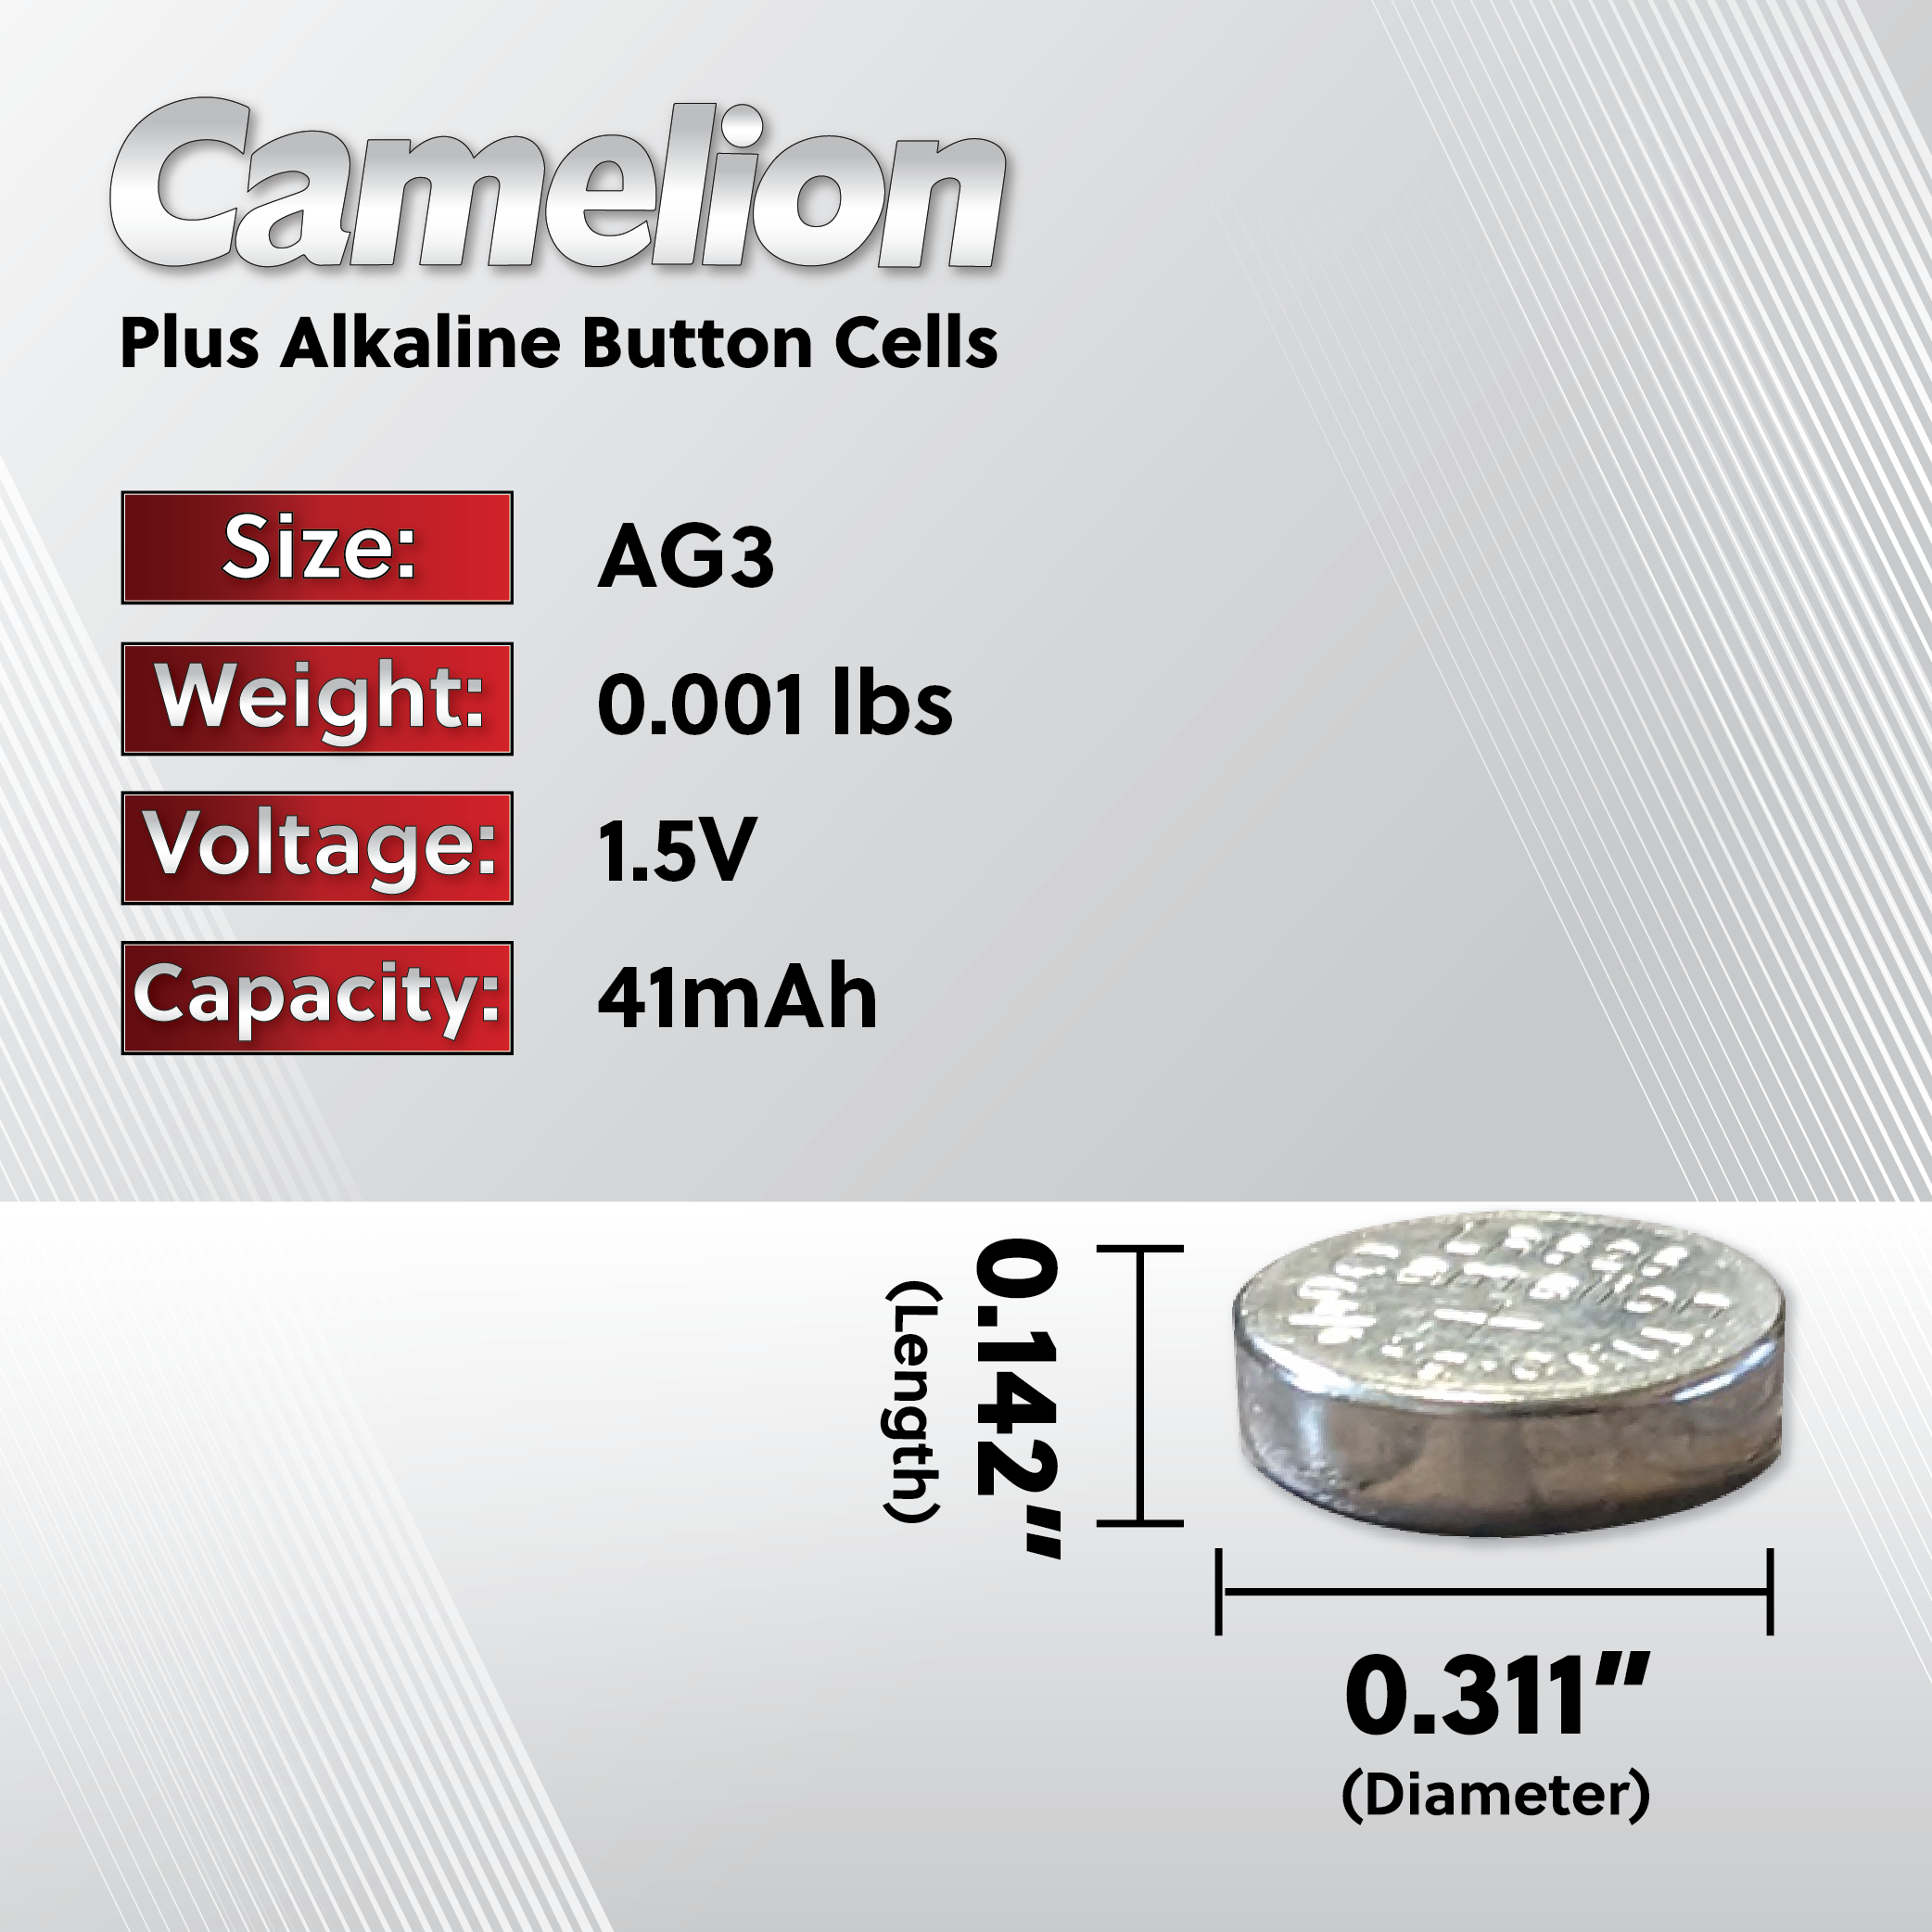 Camelion AG3 / 392 / LR41 1.5V Button Cell Battery (Two Packaging Opti –  Batteries 4 Stores